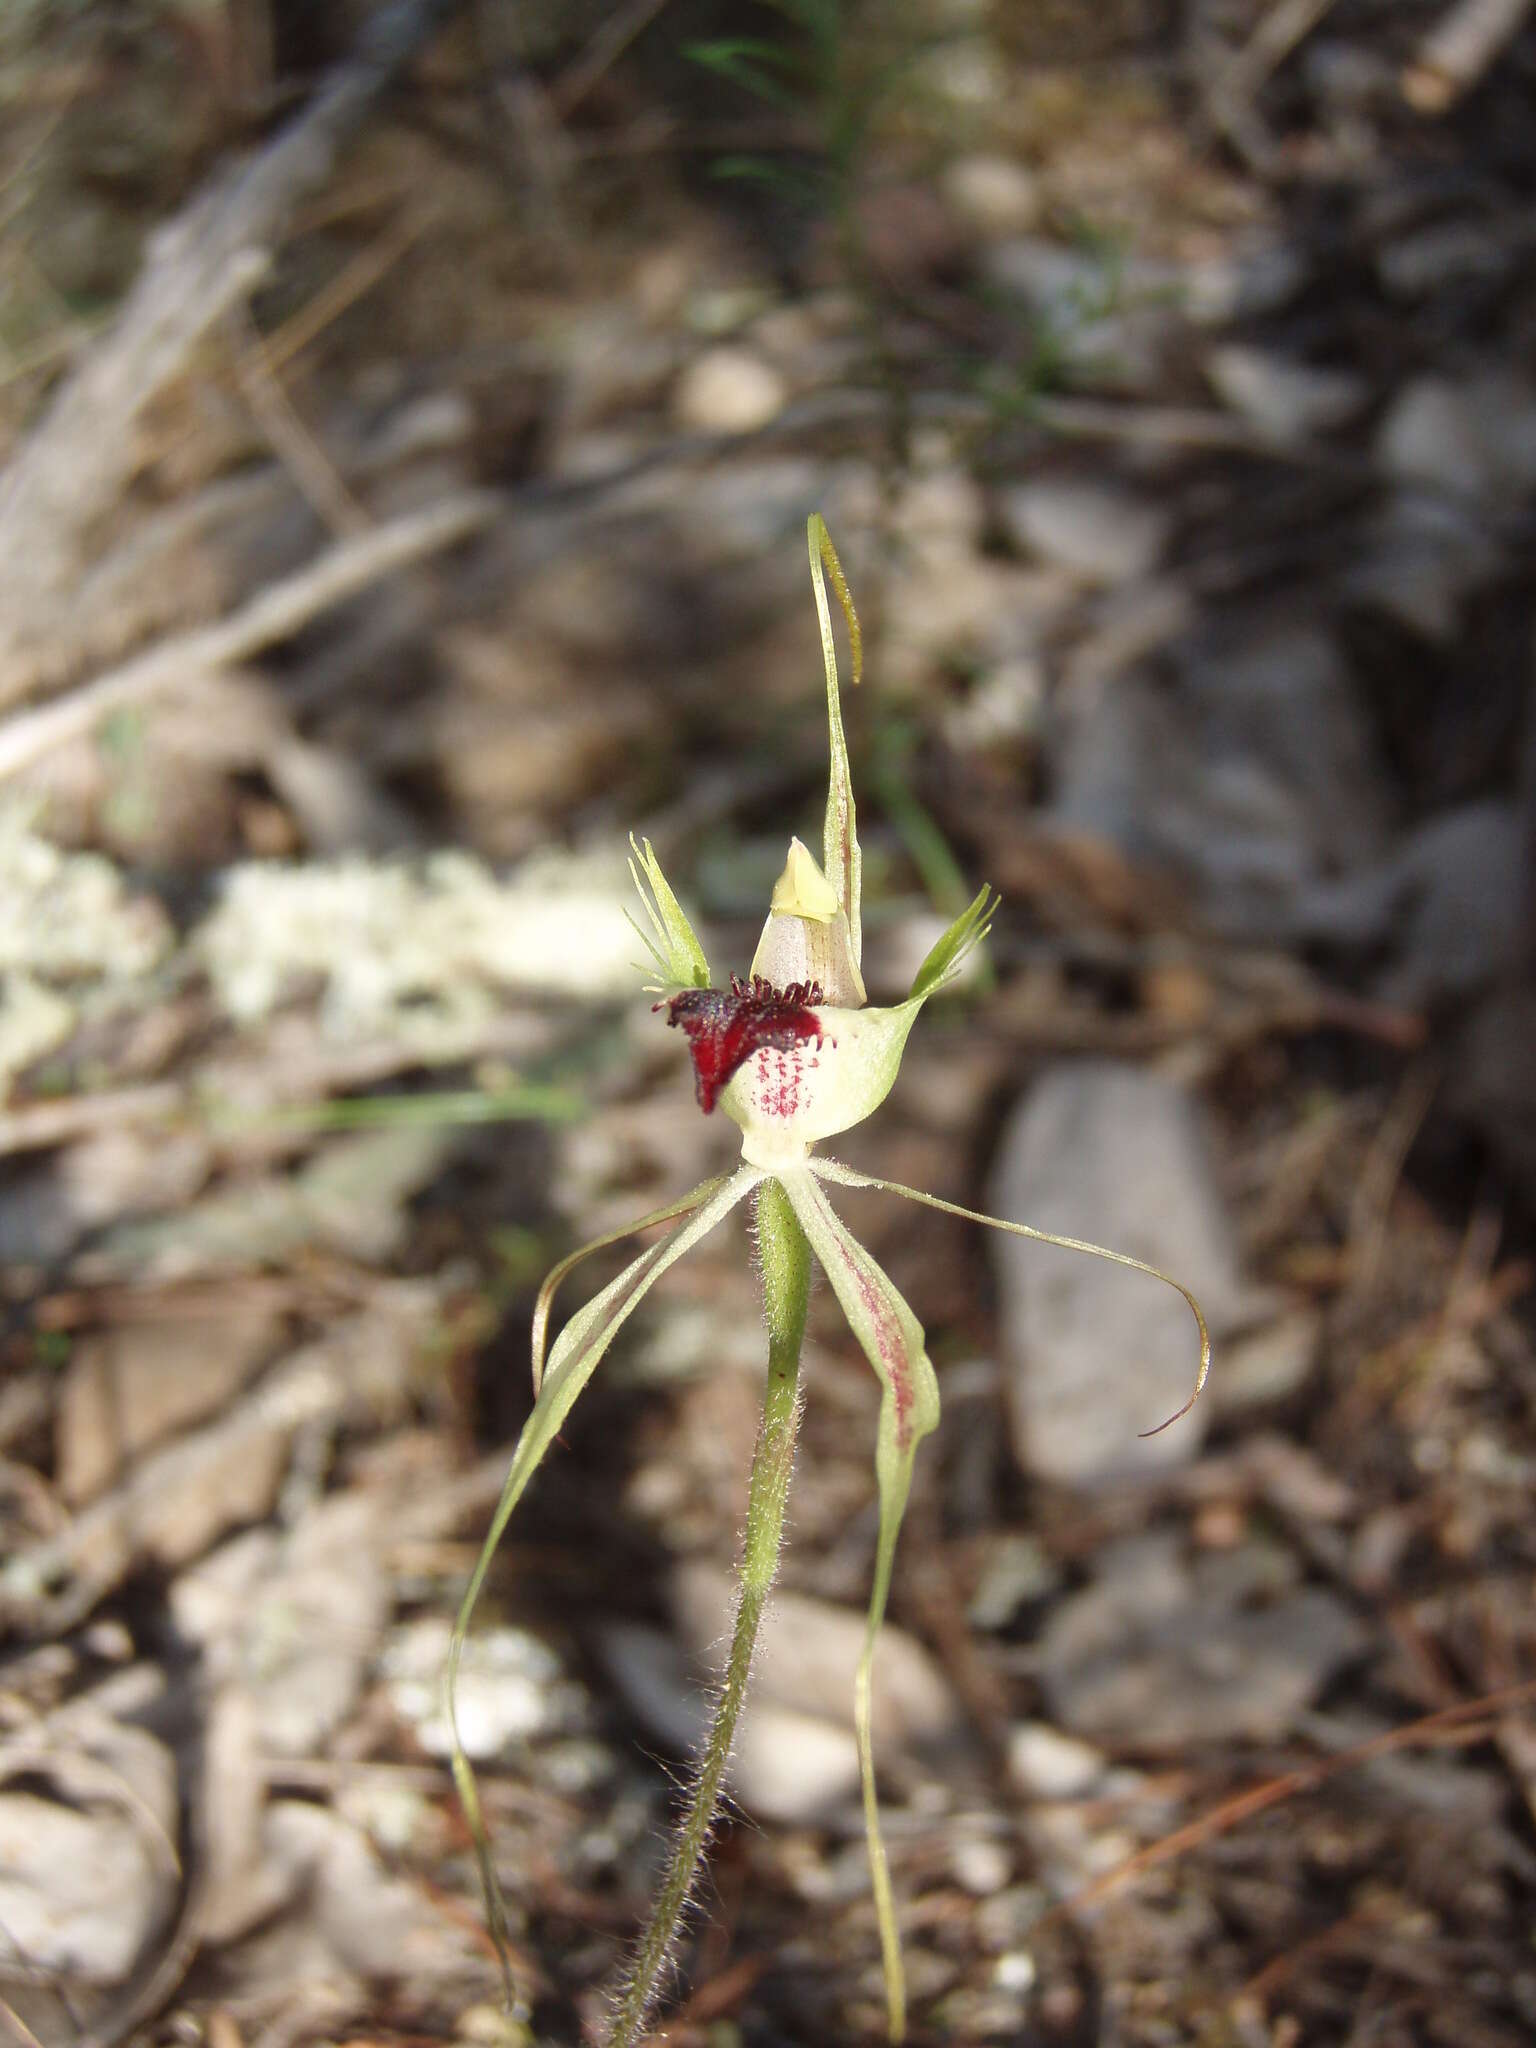 Image of Thin-clubbed mantis orchid